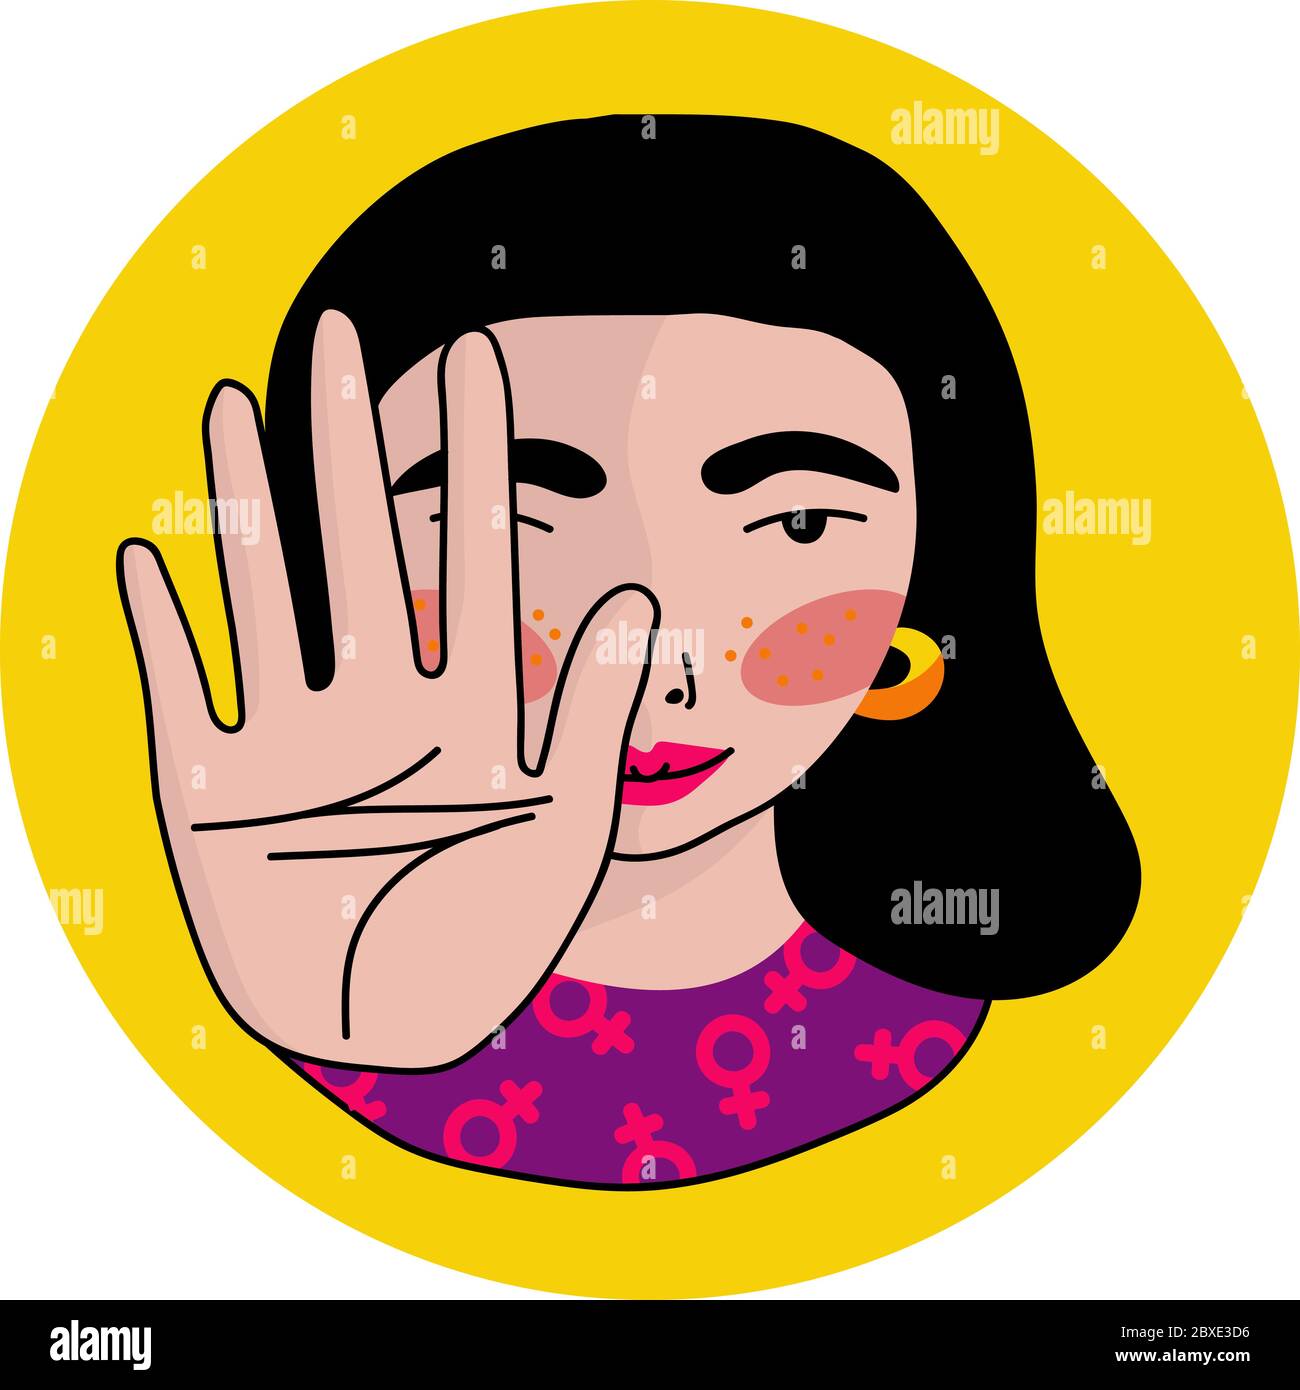 Southeast black-haired feminist girl in clothes with a women sign says stop, showing a stop gesture with her hand. Serious facial expression. Comic Stock Vector